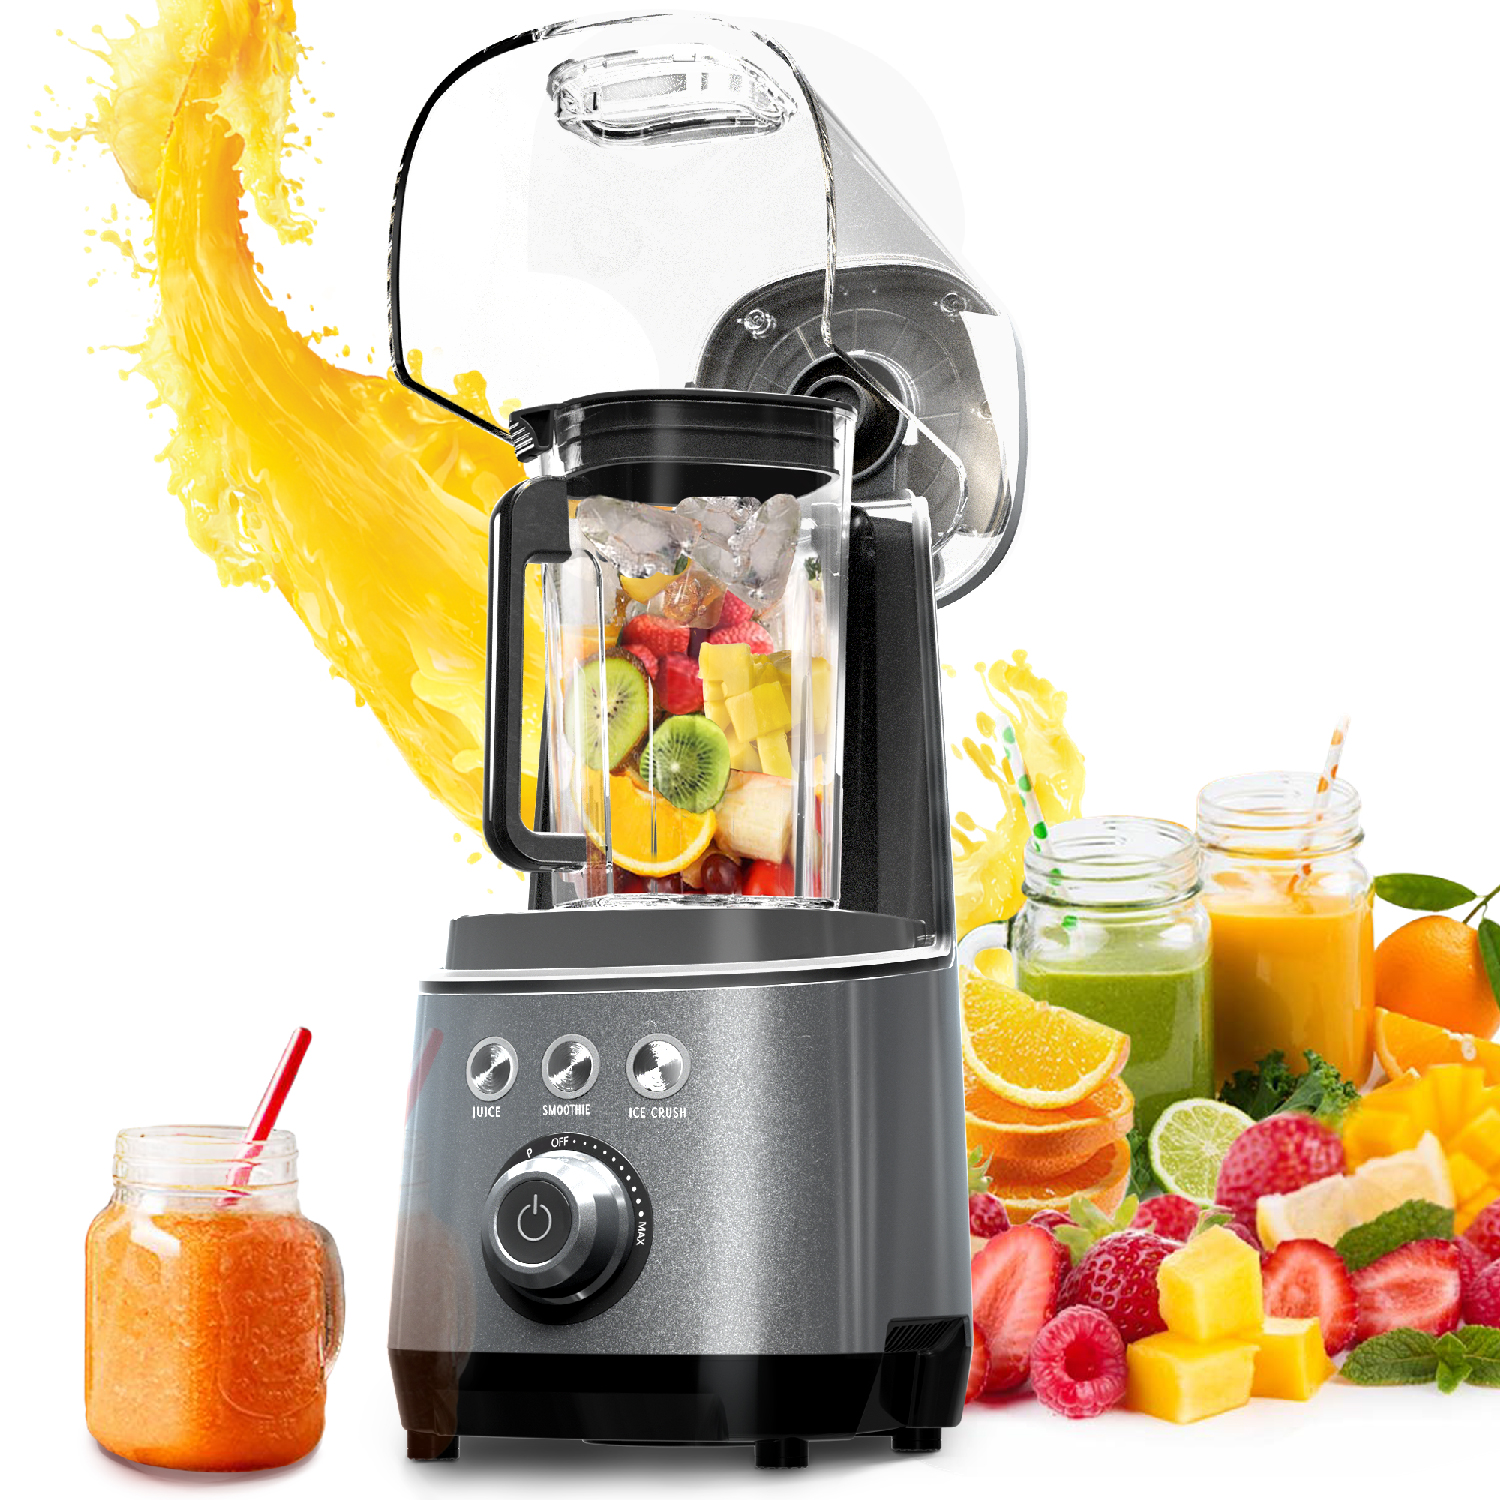 Feekaa Quiet Blender for Shakes and Smoothies, with Low Noise Soundproof and 44oz Tritan Jar, Quiet Blenders for Kitchen, Juice Blender for Fruit